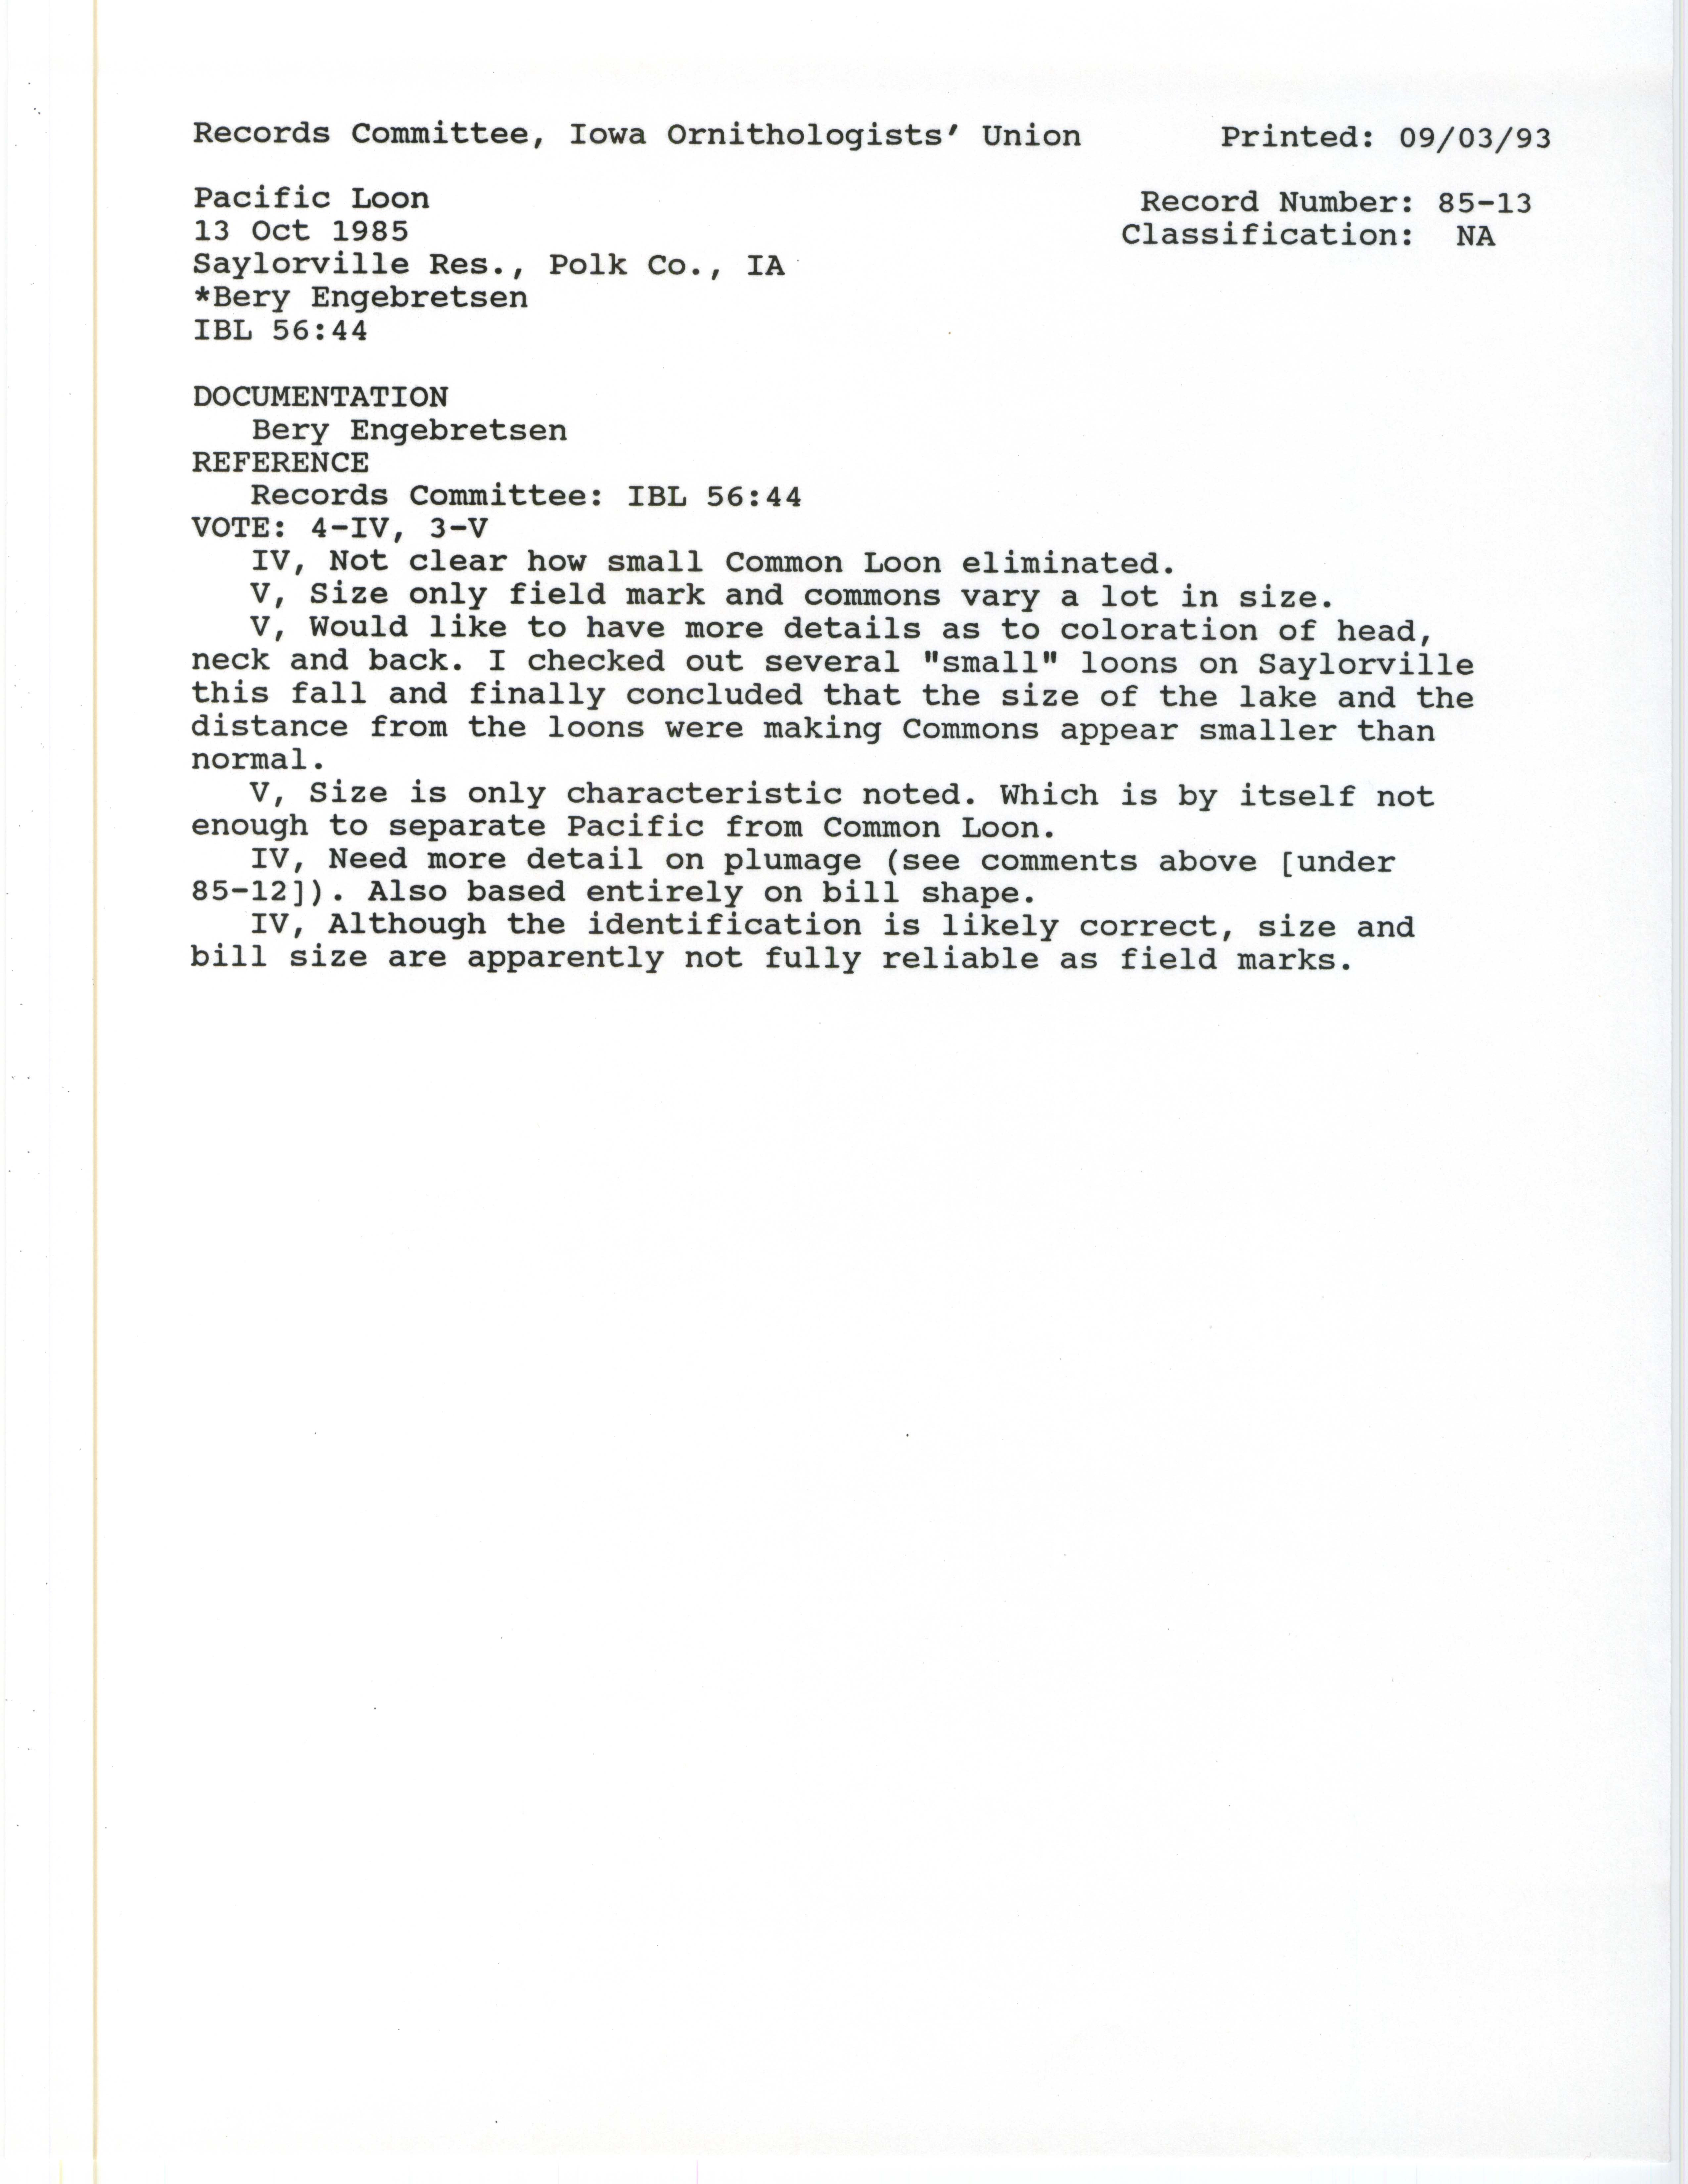 Records Committee review for rare bird sighting of Pacific Loon at Saylorville Reservoir, 1985